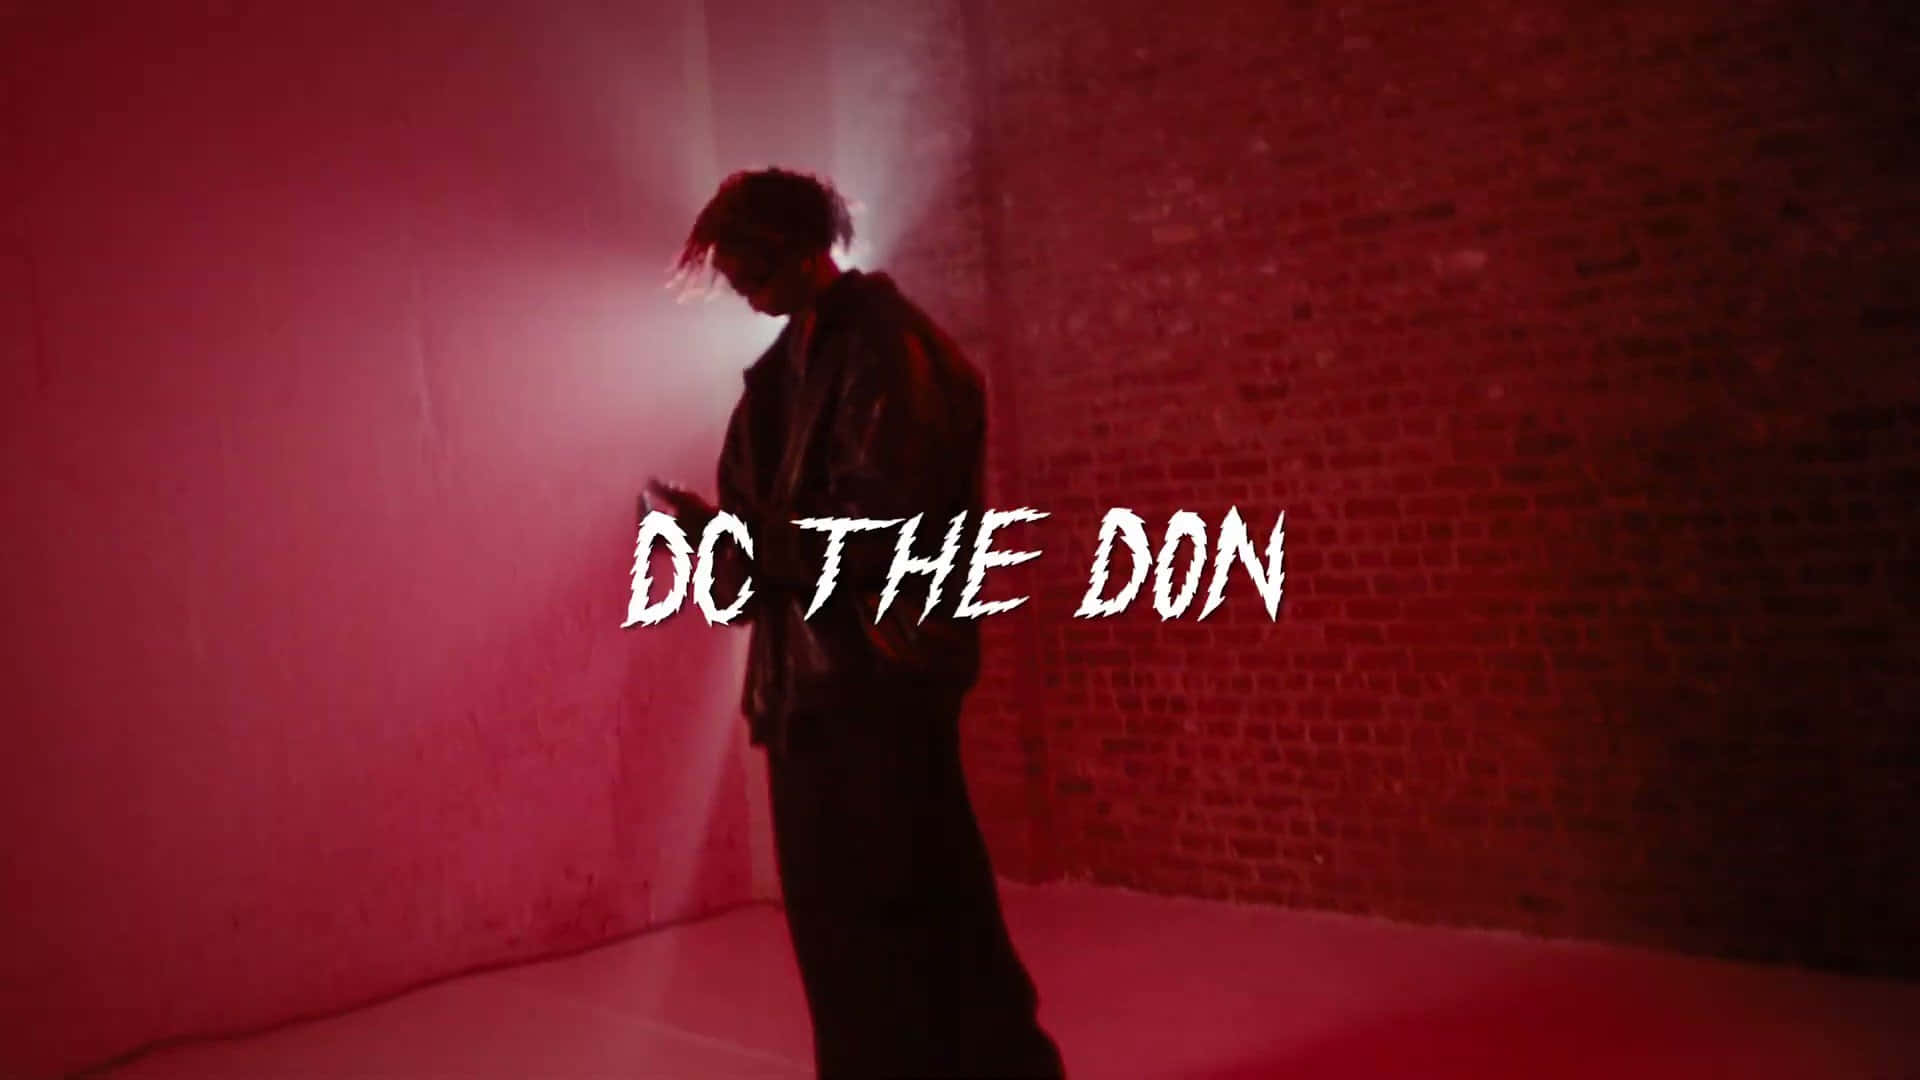 D C The Don Red Backdrop Wallpaper